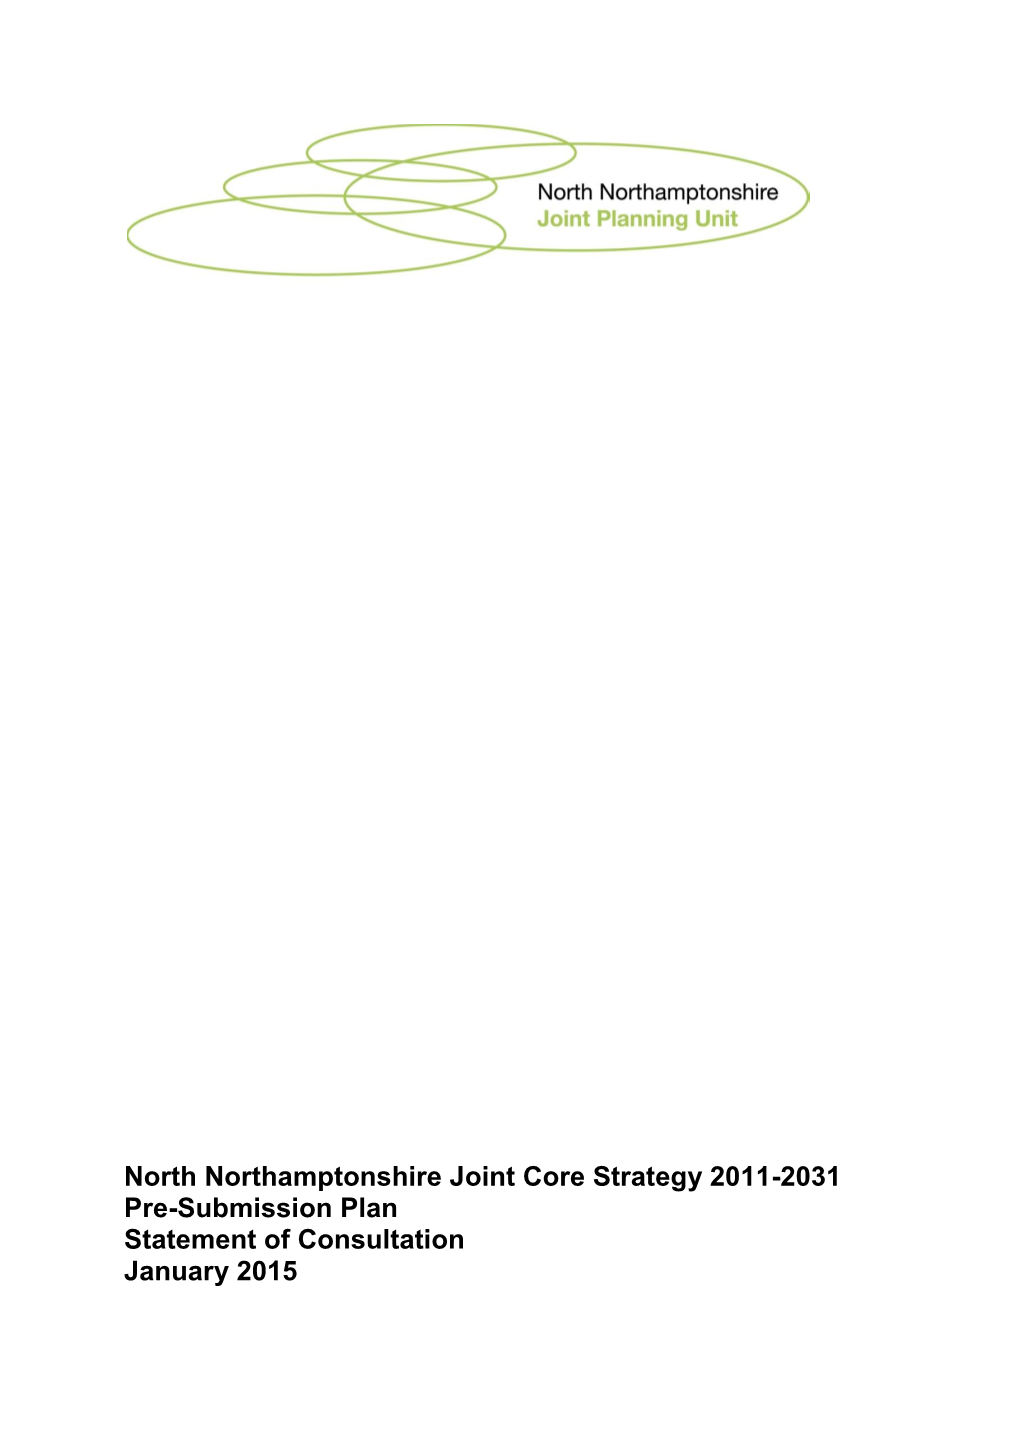 North Northamptonshire Joint Core Strategy 2011-2031 Pre-Submission Plan Statement of Consultation January 2015